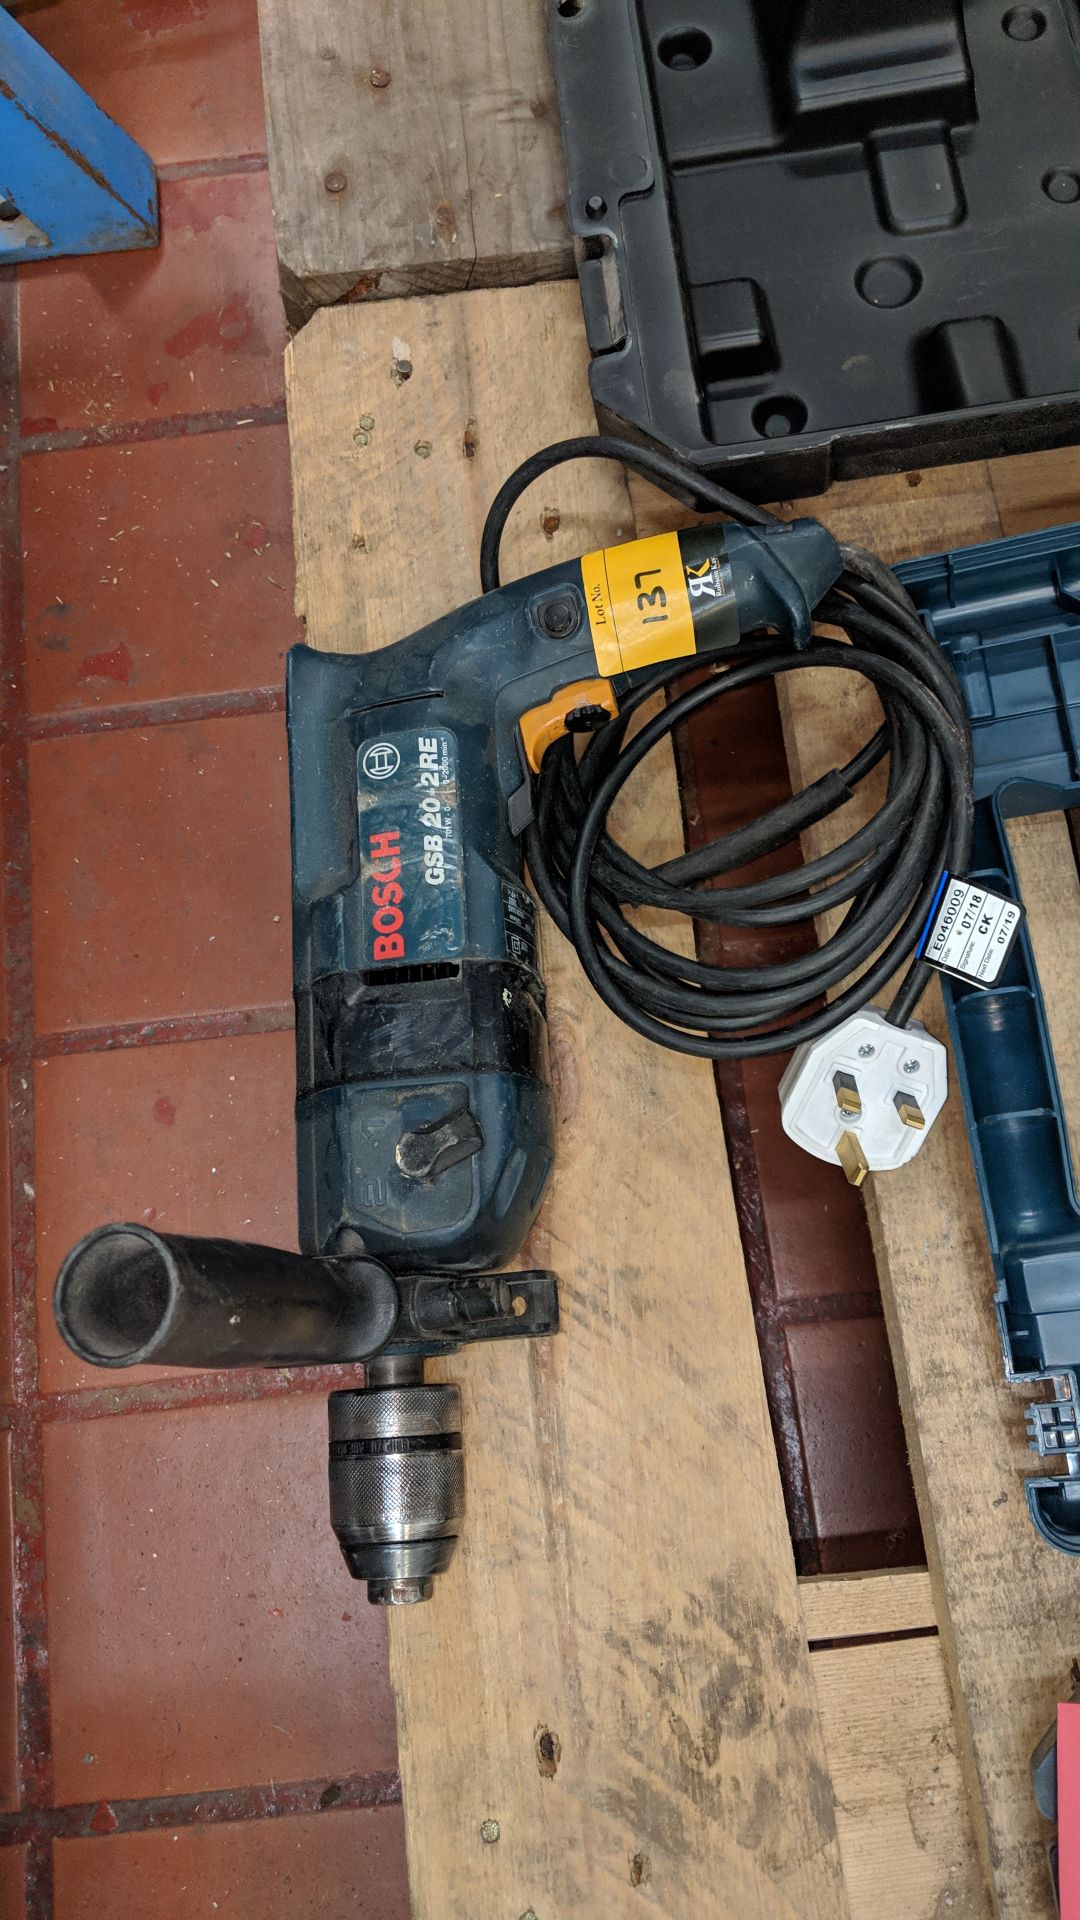 Bosch GSB 20-2RE professional corded drill This is one of a large number of lots in this sale - Image 4 of 4